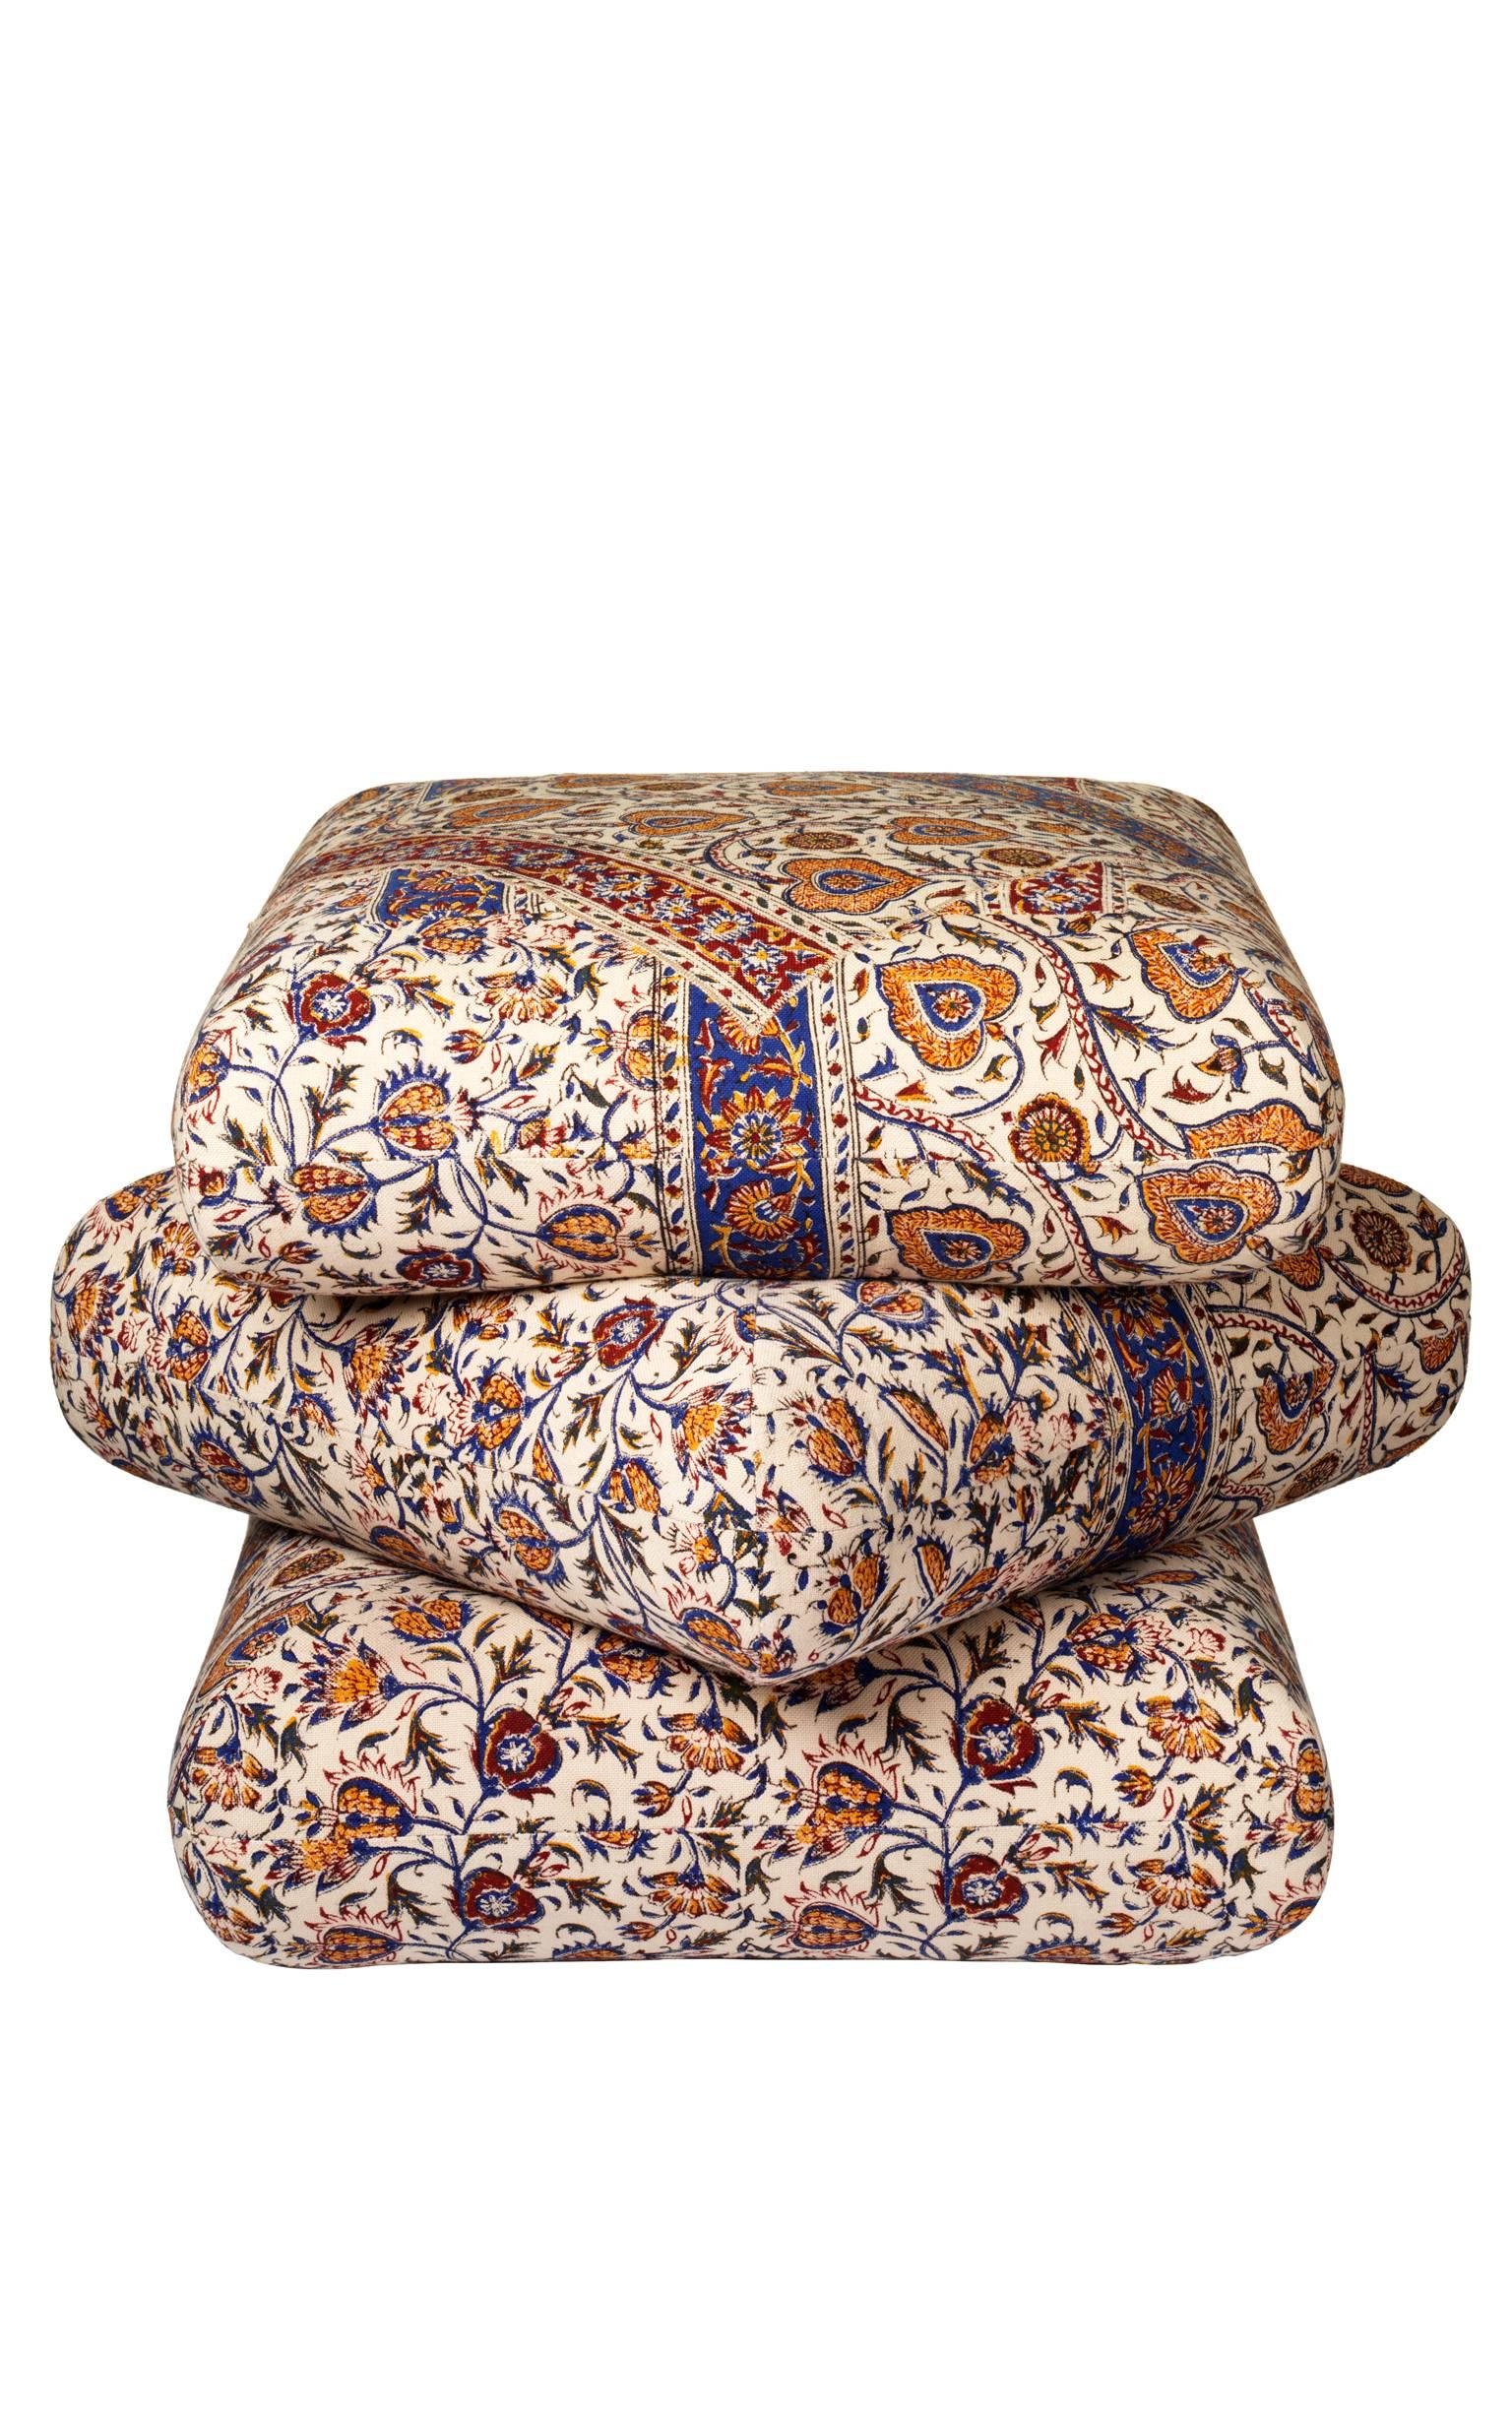 Cabana pouf based on a design after Renzo Mongiardino, 21st century. 

Pouf upholstered in one of a kind Ghalamkar Persian textile with a unique geometric shape, all handmade and sewn in Italy. These poufs were originally inspired by a Mongiardino